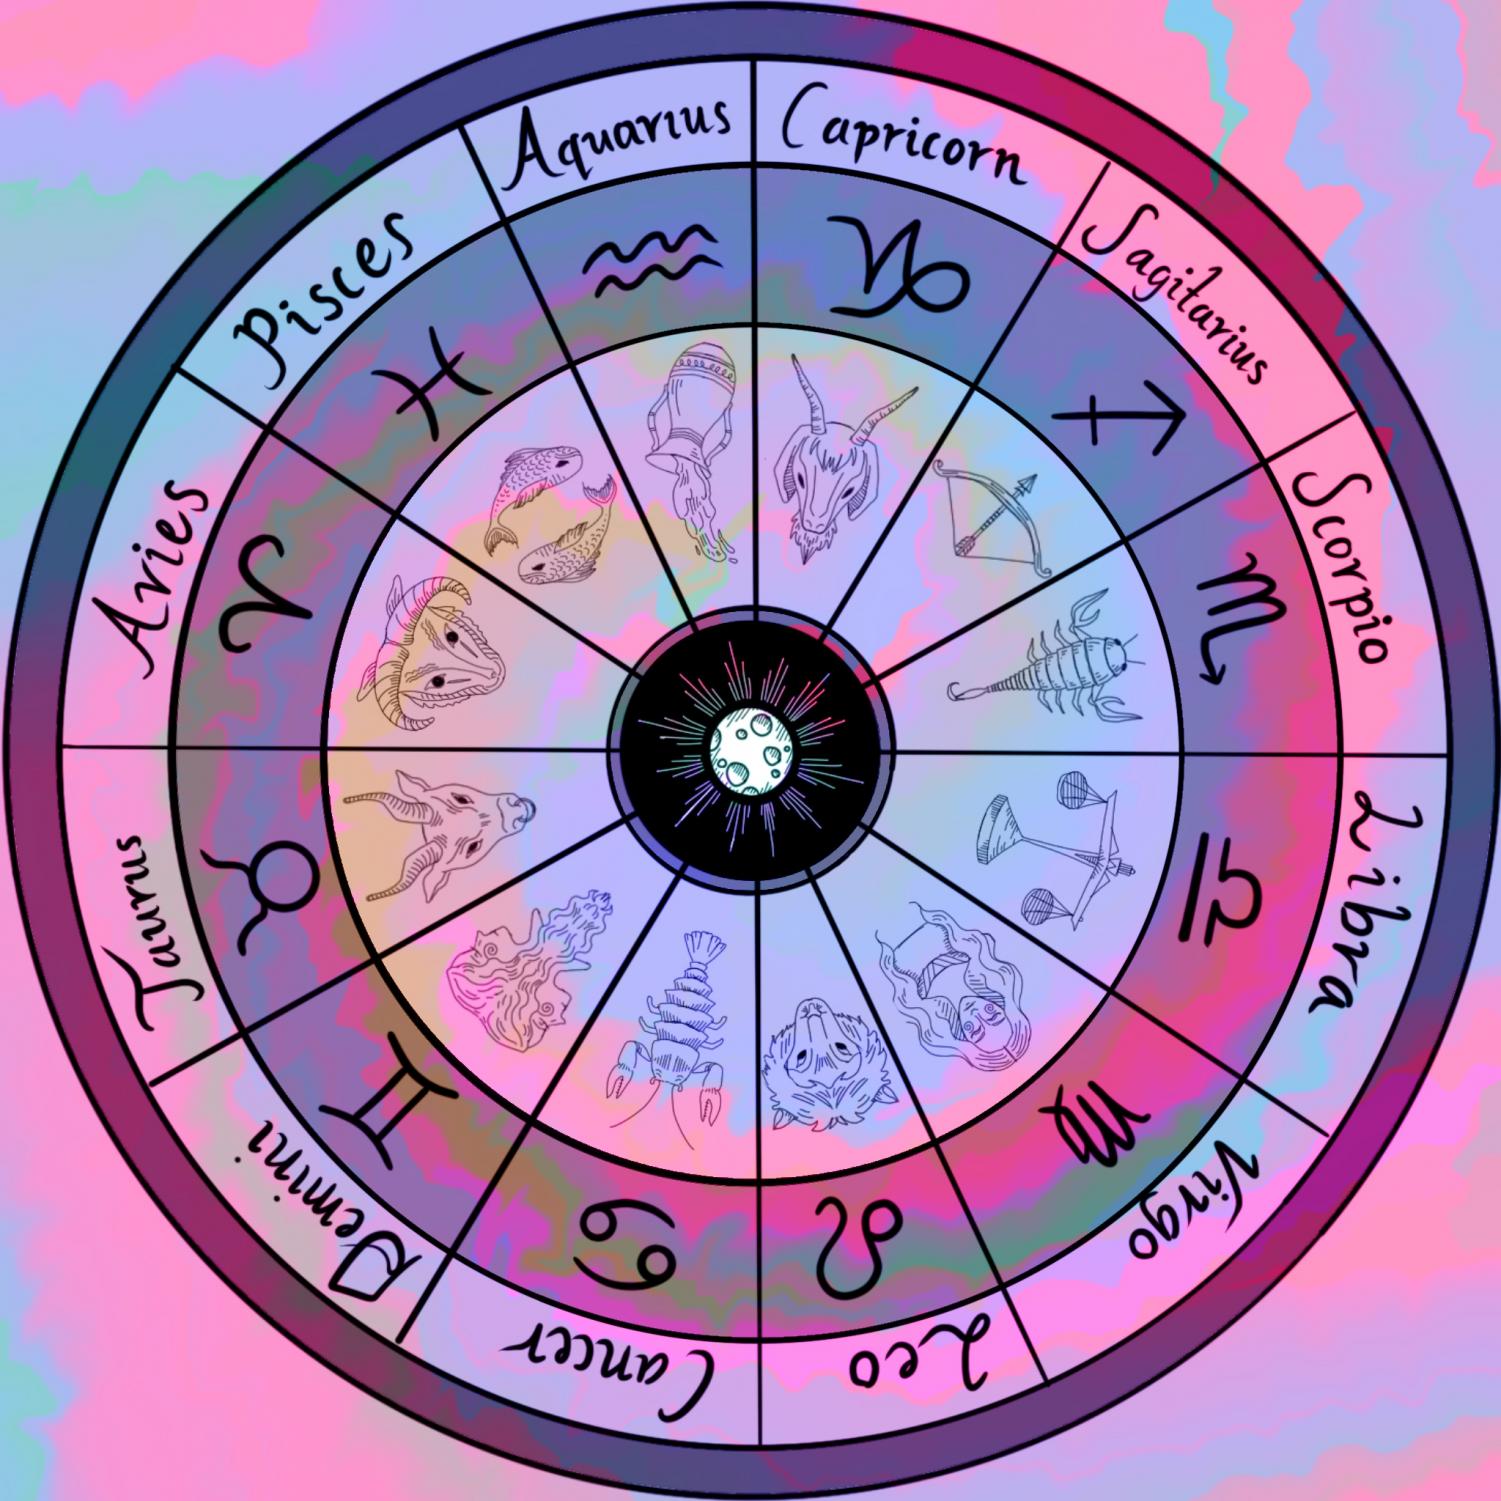 Horoscopes: What should your goal be this semester? – The Scarlet